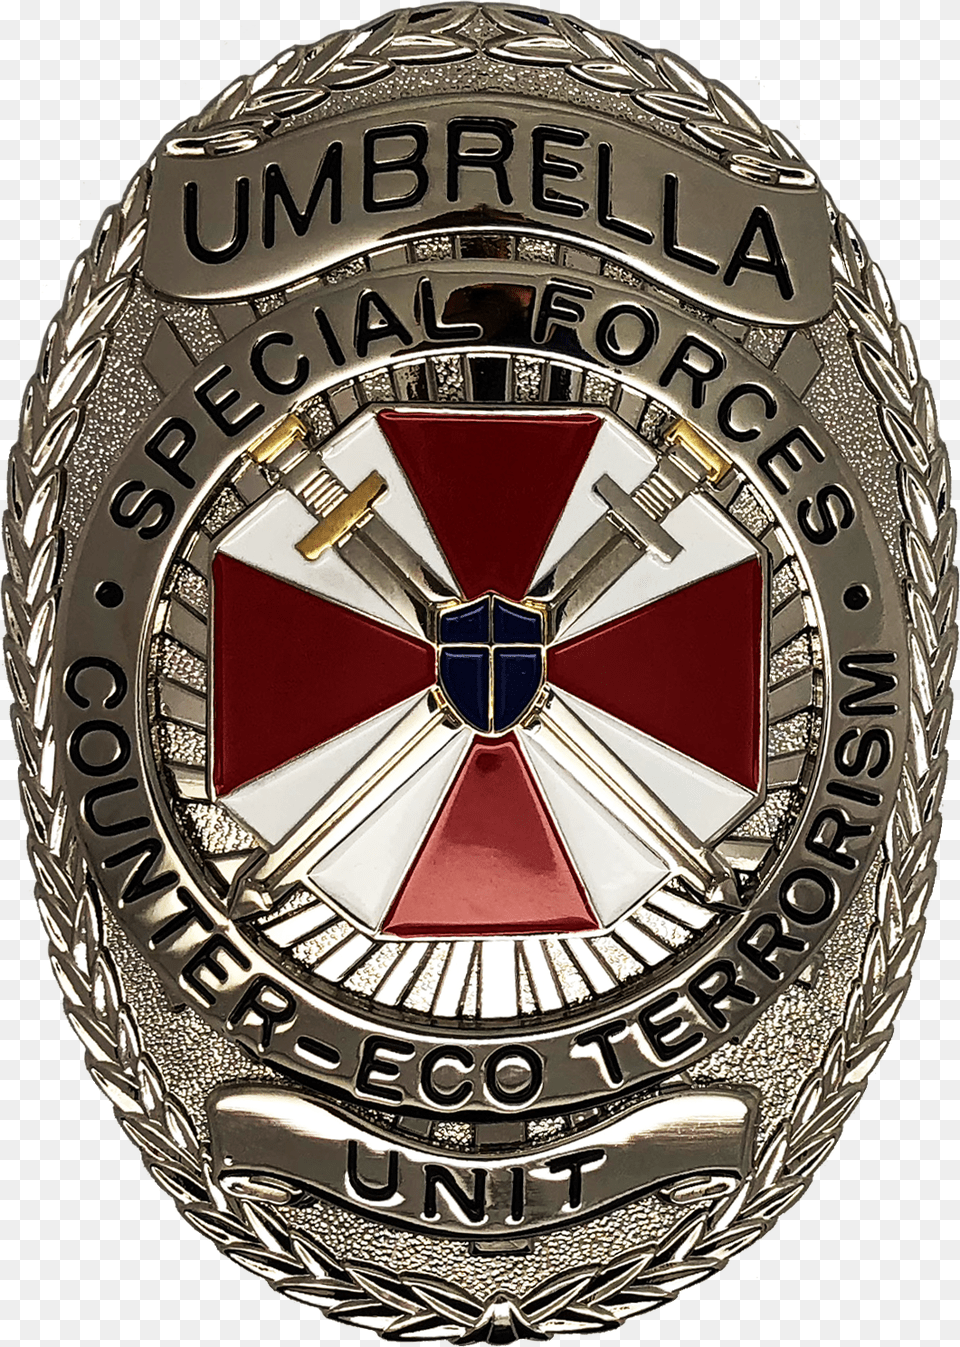 Umbrella Corporation Special Forces Counter Eco Terrorism Umbrella Corporation Special Forces, Badge, Logo, Symbol, Wristwatch Png Image